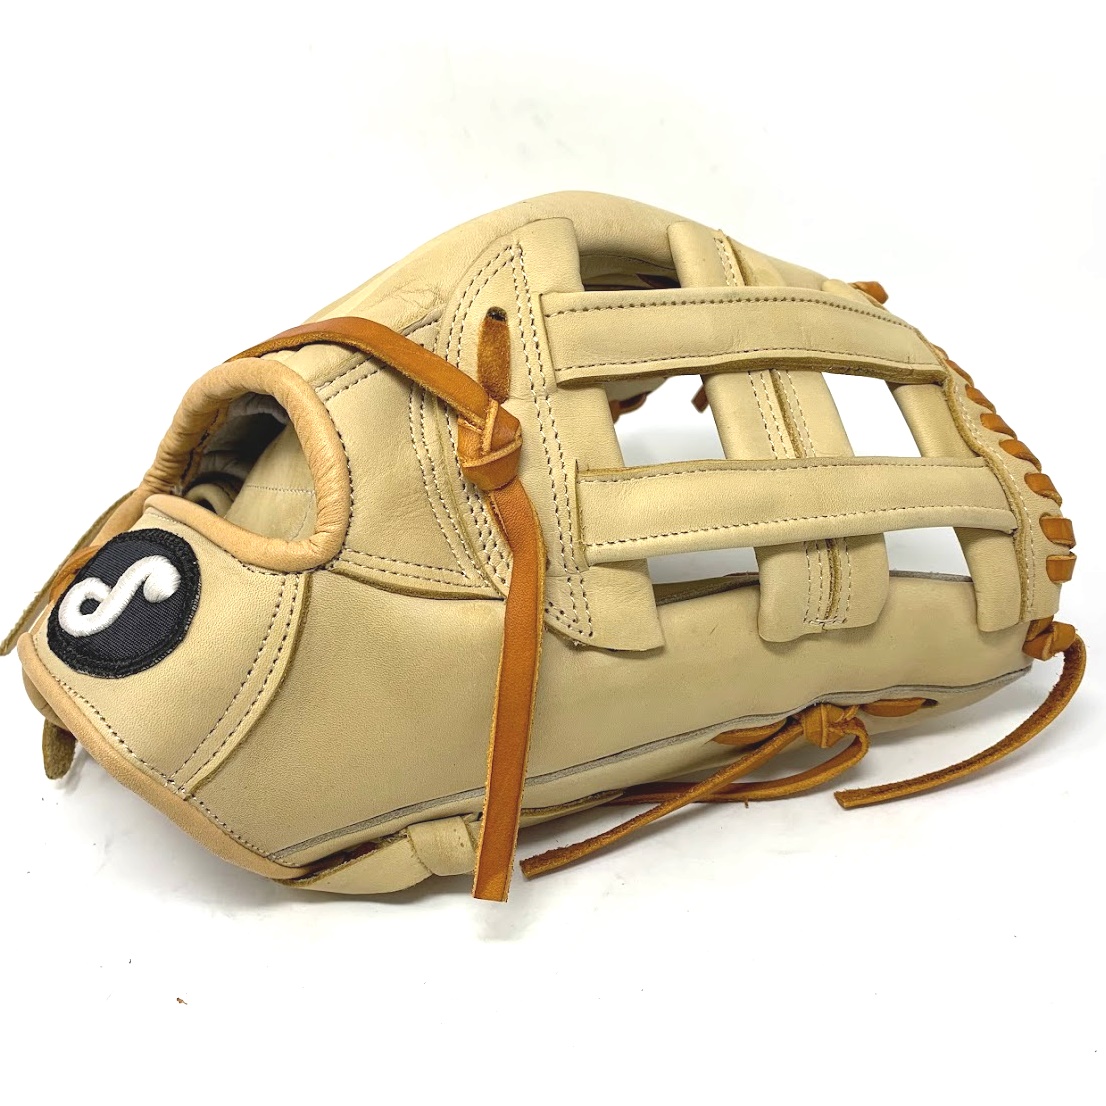 soto-camel-12-75-h-web-baseball-glove-right-hand-throw S20-1275-CM-H-RightHandThrow soto  <span><strong><span style=font-size medium;>Made in Mexico </span></strong>  <img class=__mce_add_custom__ title=mexico-flag-50.jpg src=  